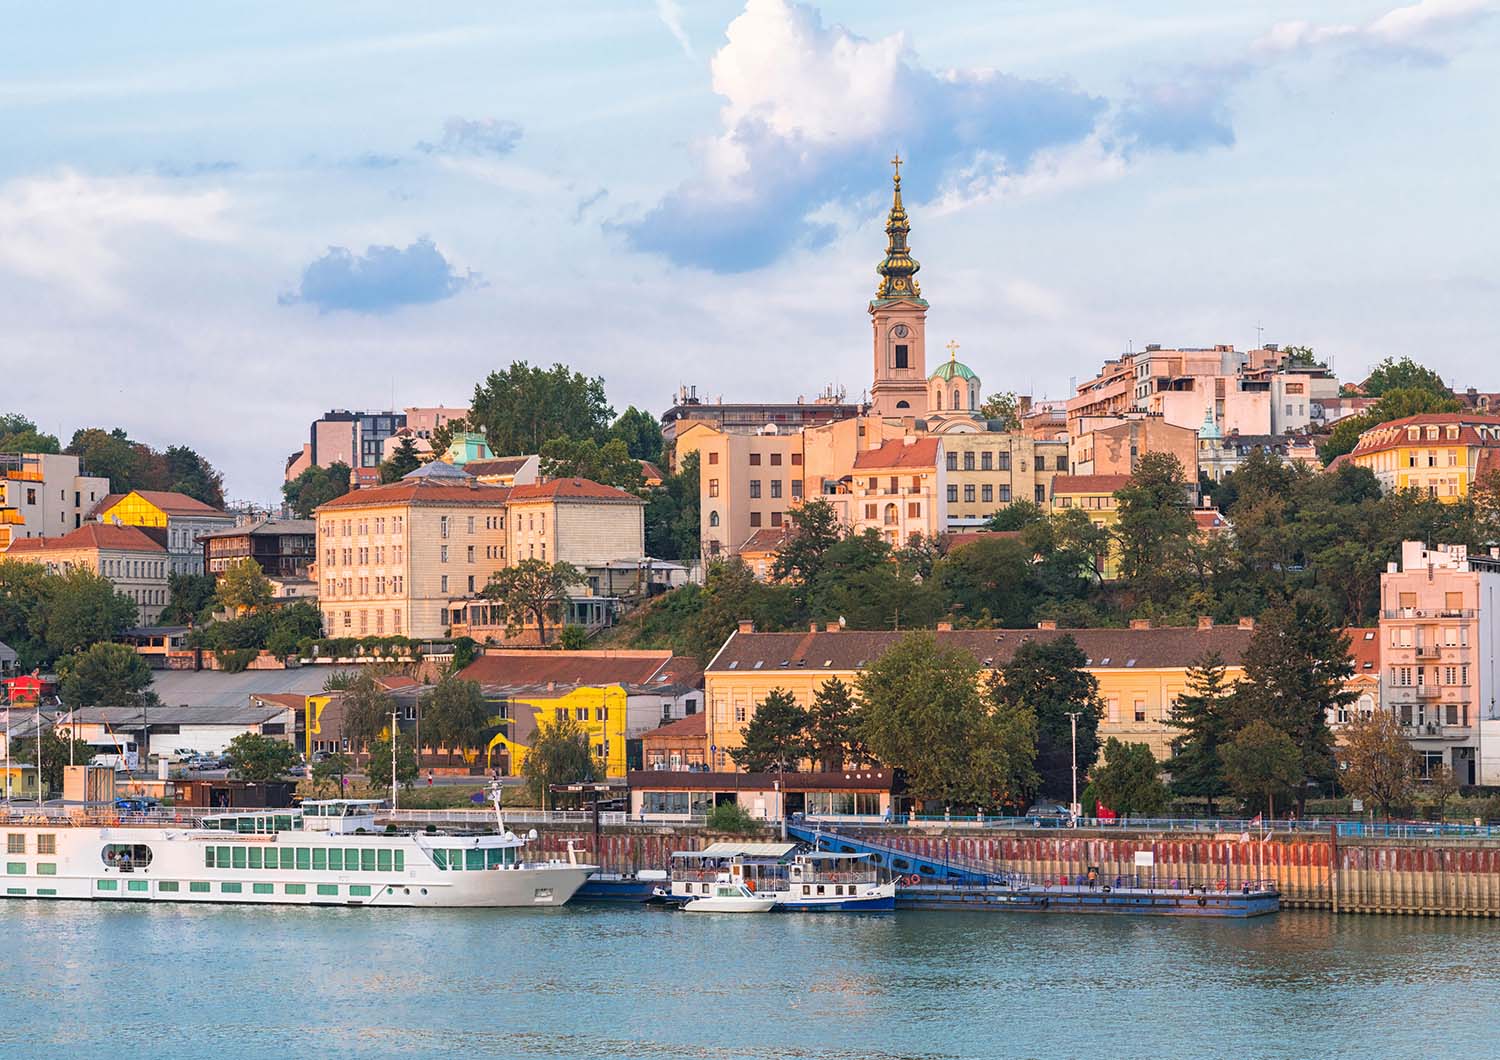  view of the historic center of Belgrade on the banks of the Sava River, Serbia